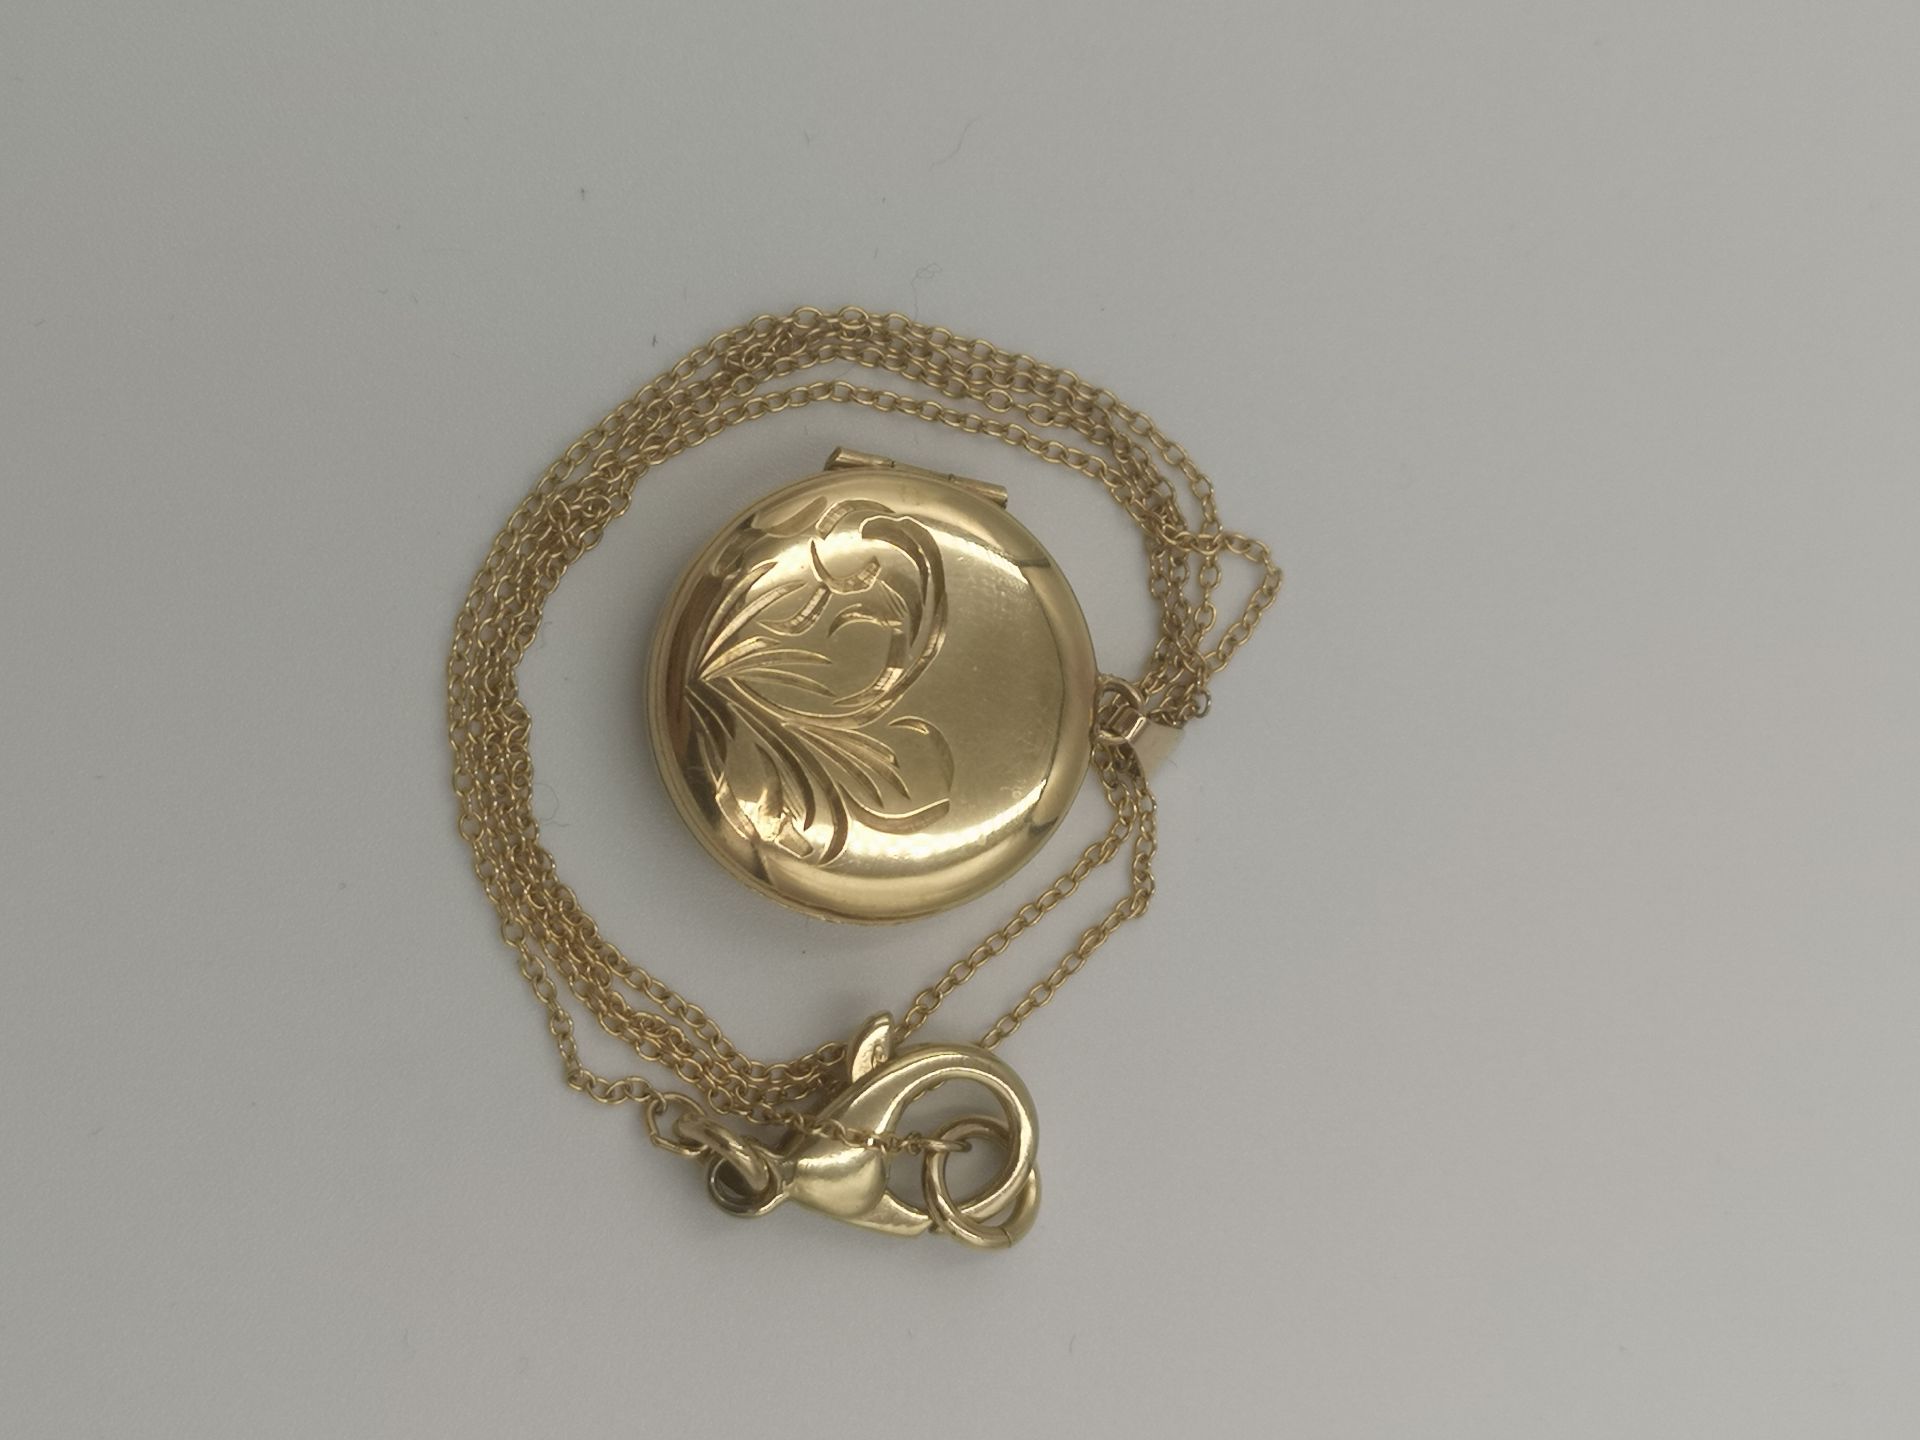 9ct gold locket and chain - Image 3 of 4